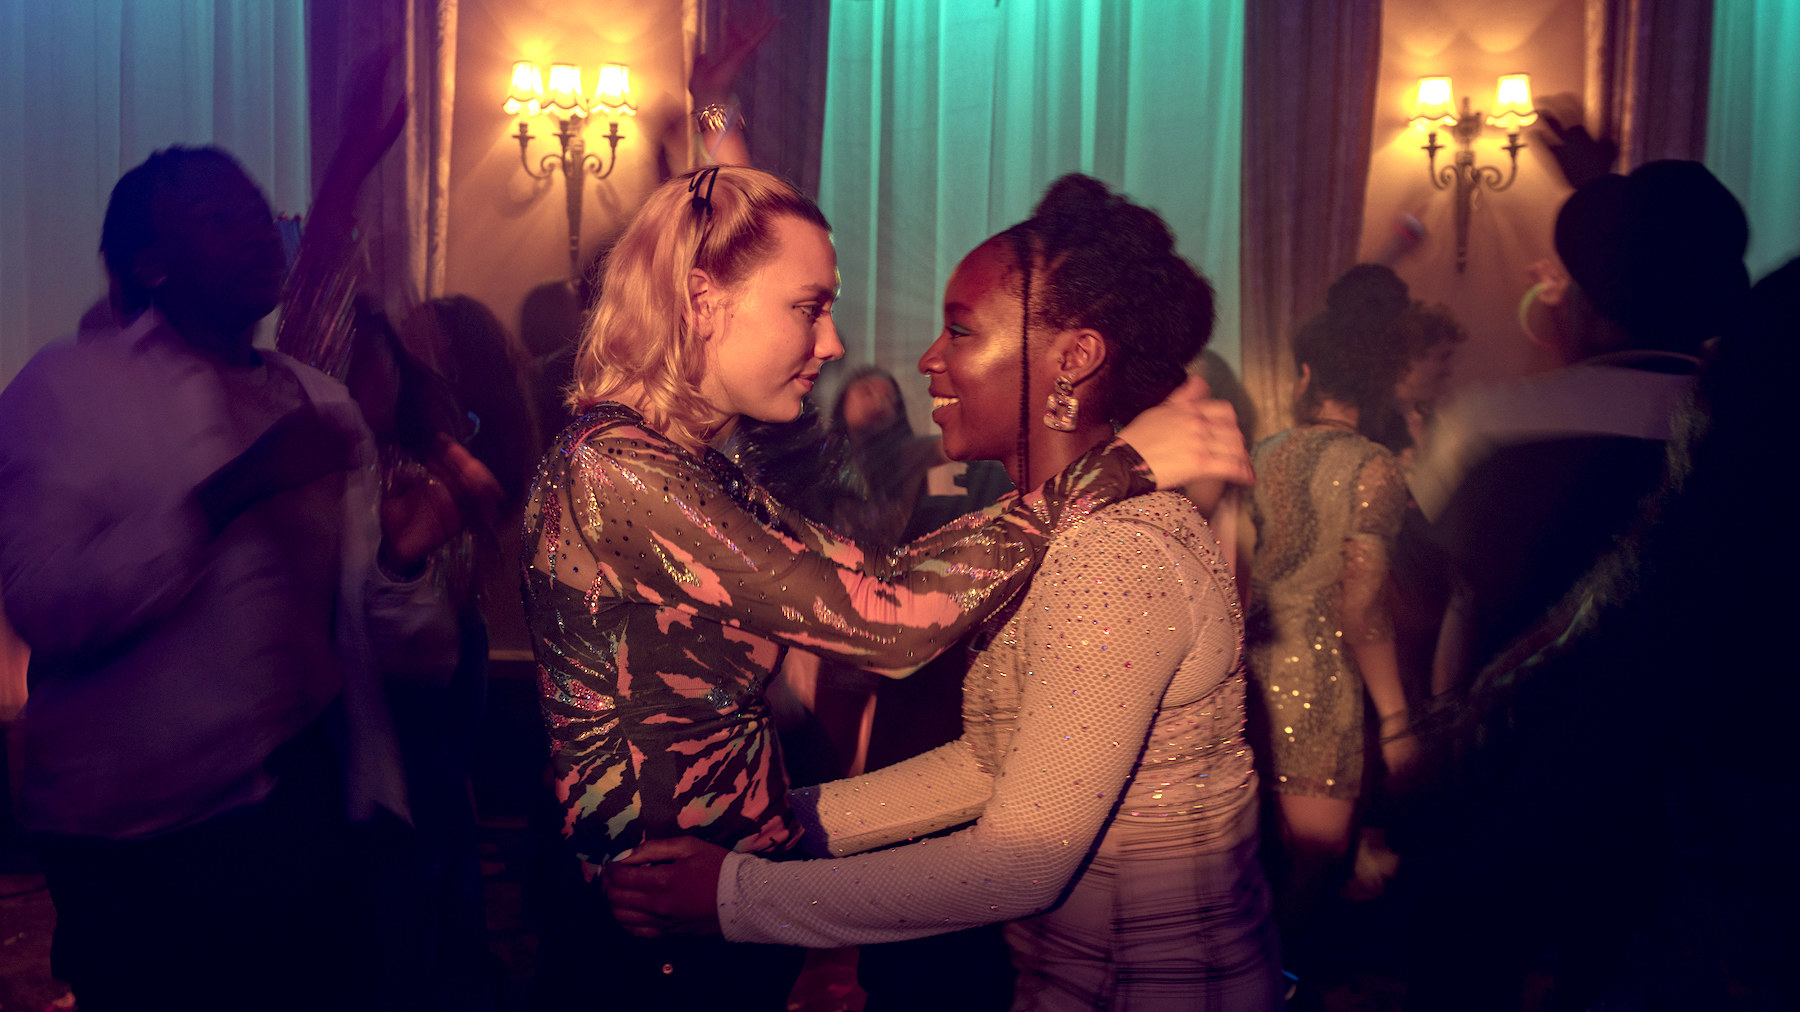 A still from Heartstopper shows two girls Tara and Darcy slow dancing together at a party and smiling